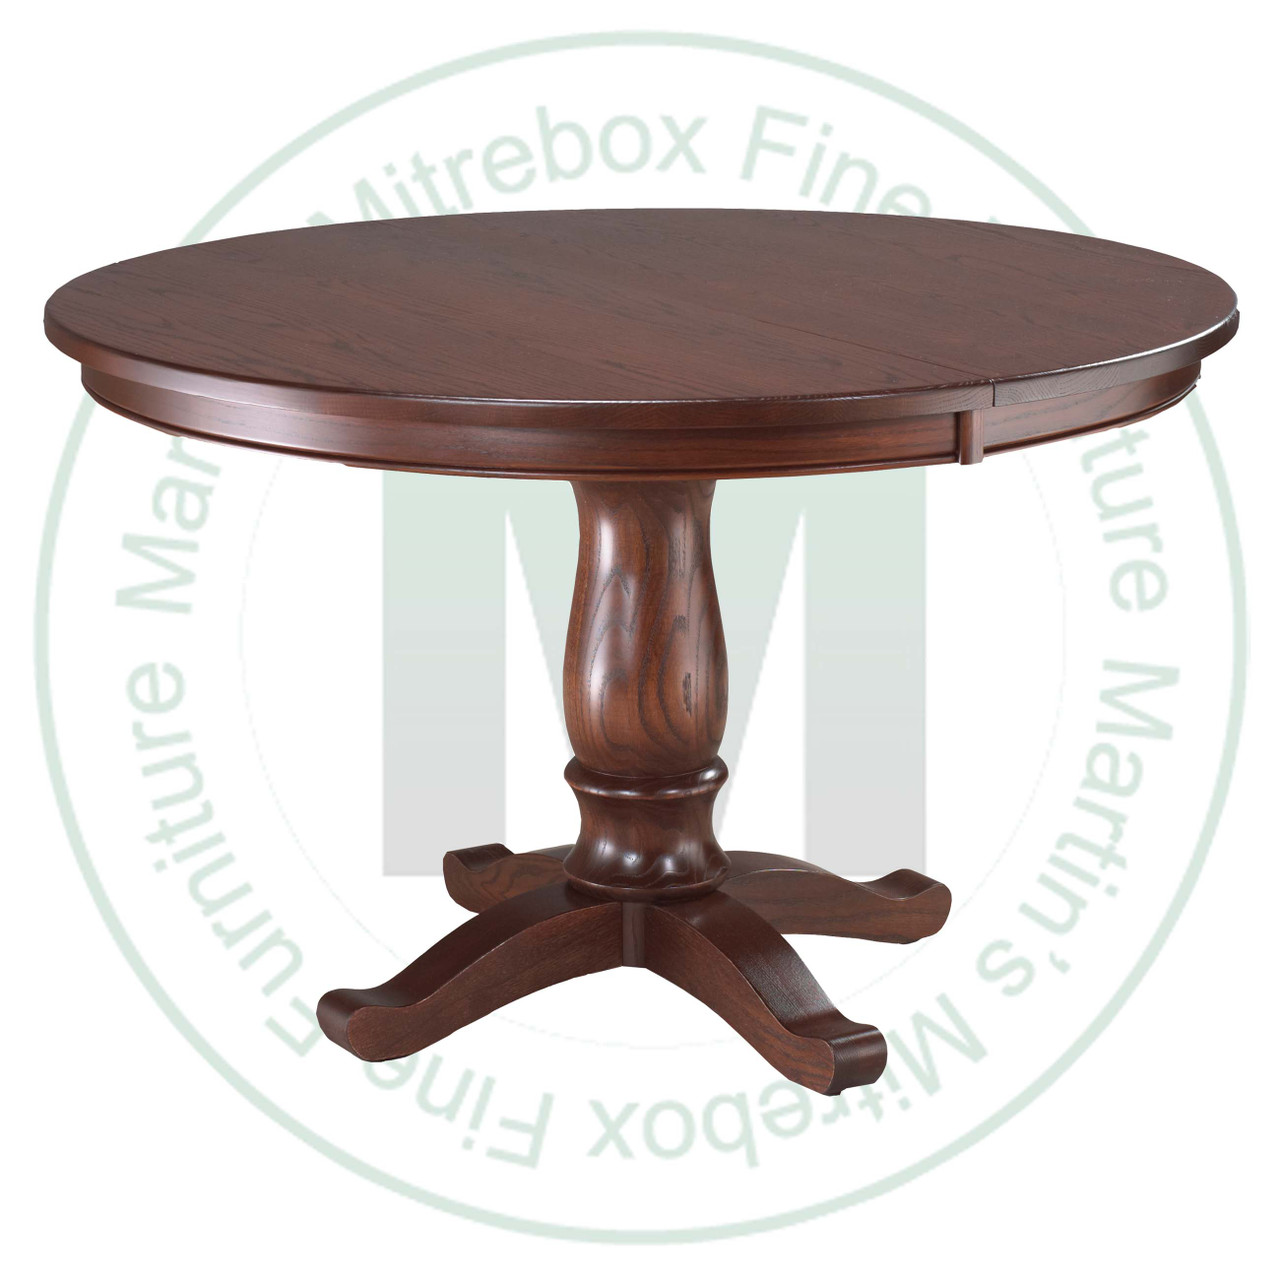 Wormy Maple Kimberly Crest Single Pedestal Table 42''D x 42''W x 30''H With 1 - 12'' Leaf Table. Table Has 1'' Thick Top.